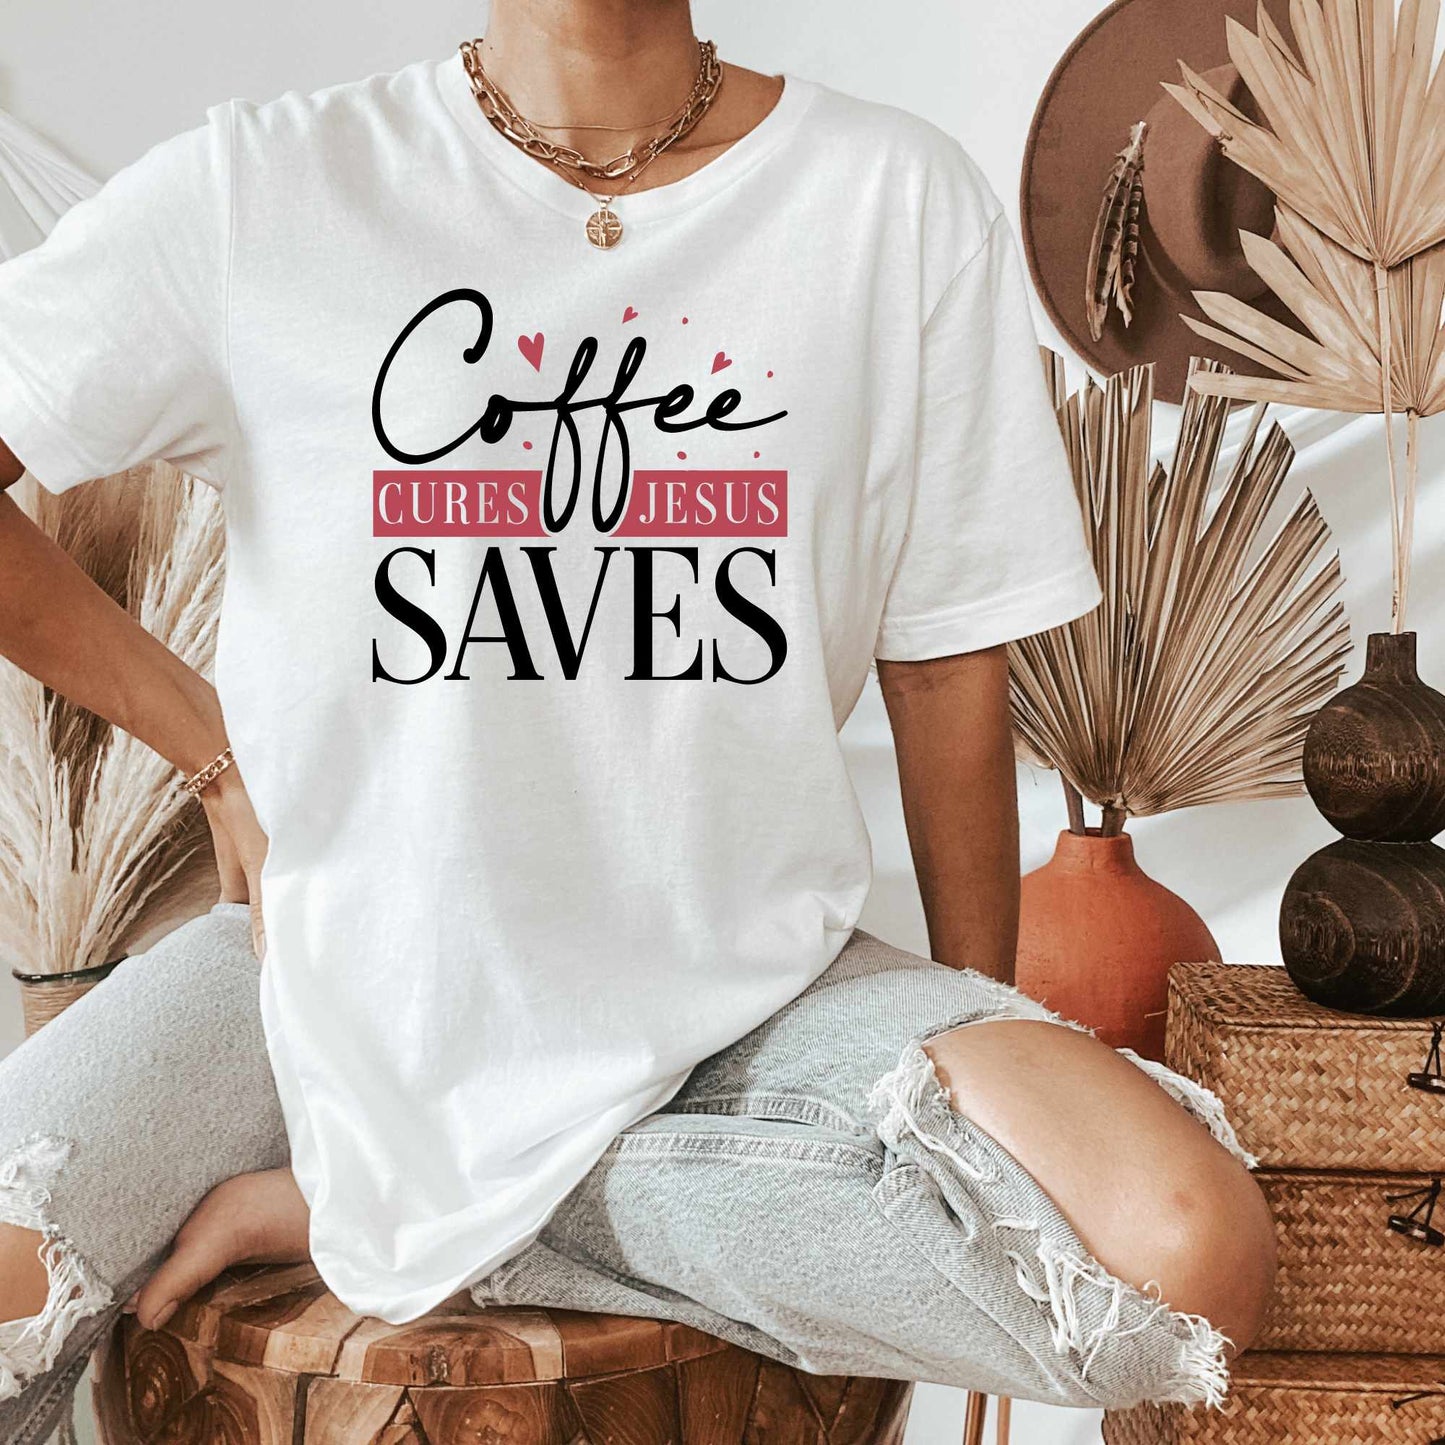 Coffee Cures Jesus Saves, Funny Shirts and Jesus and Coffee